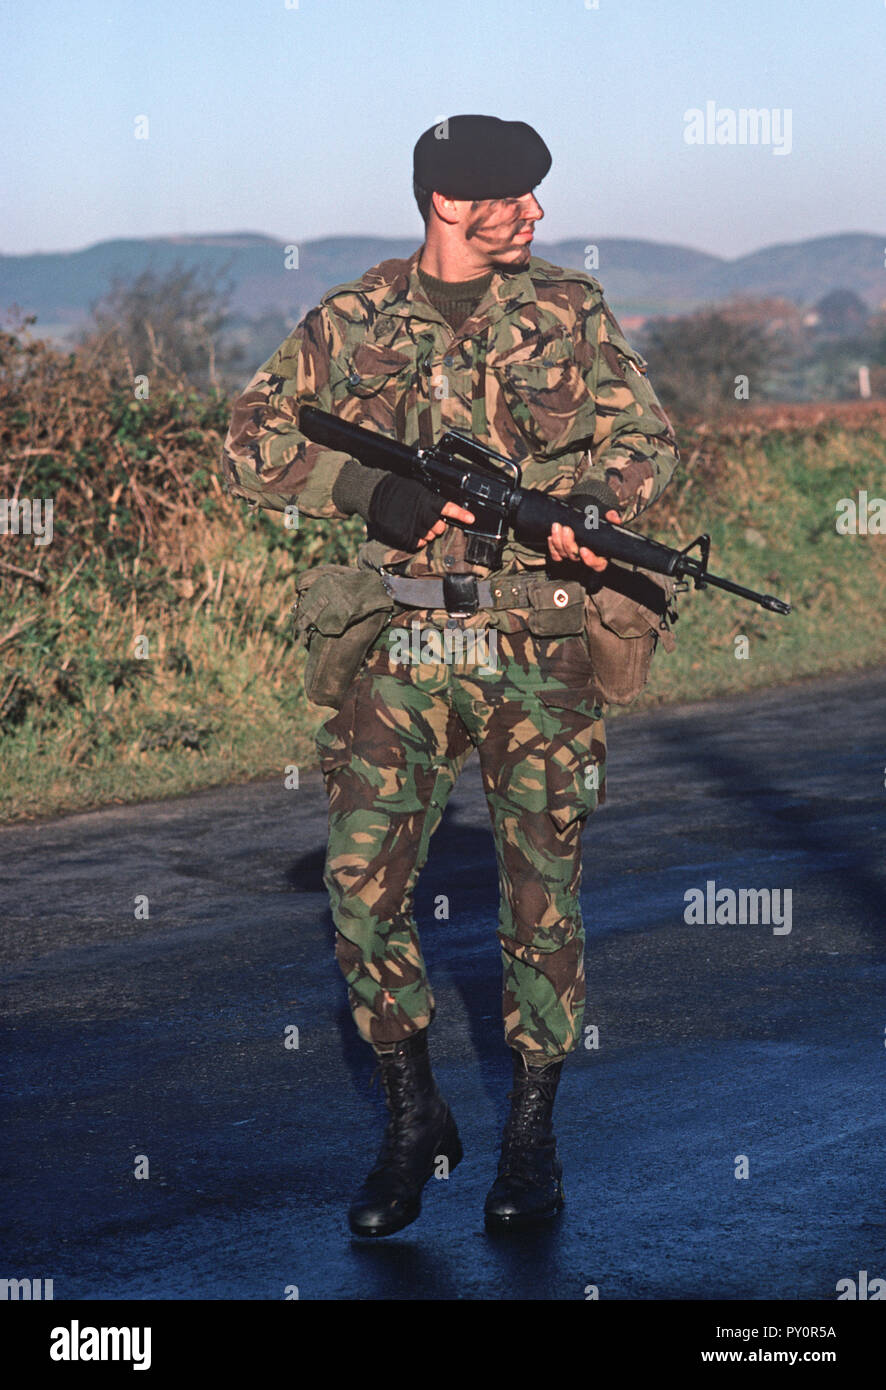 British Army soldier on patrol in South Armagh during The Troubles, 1985, Northern Ireland Conflict, Northern Ireland, 1980s Stock Photo